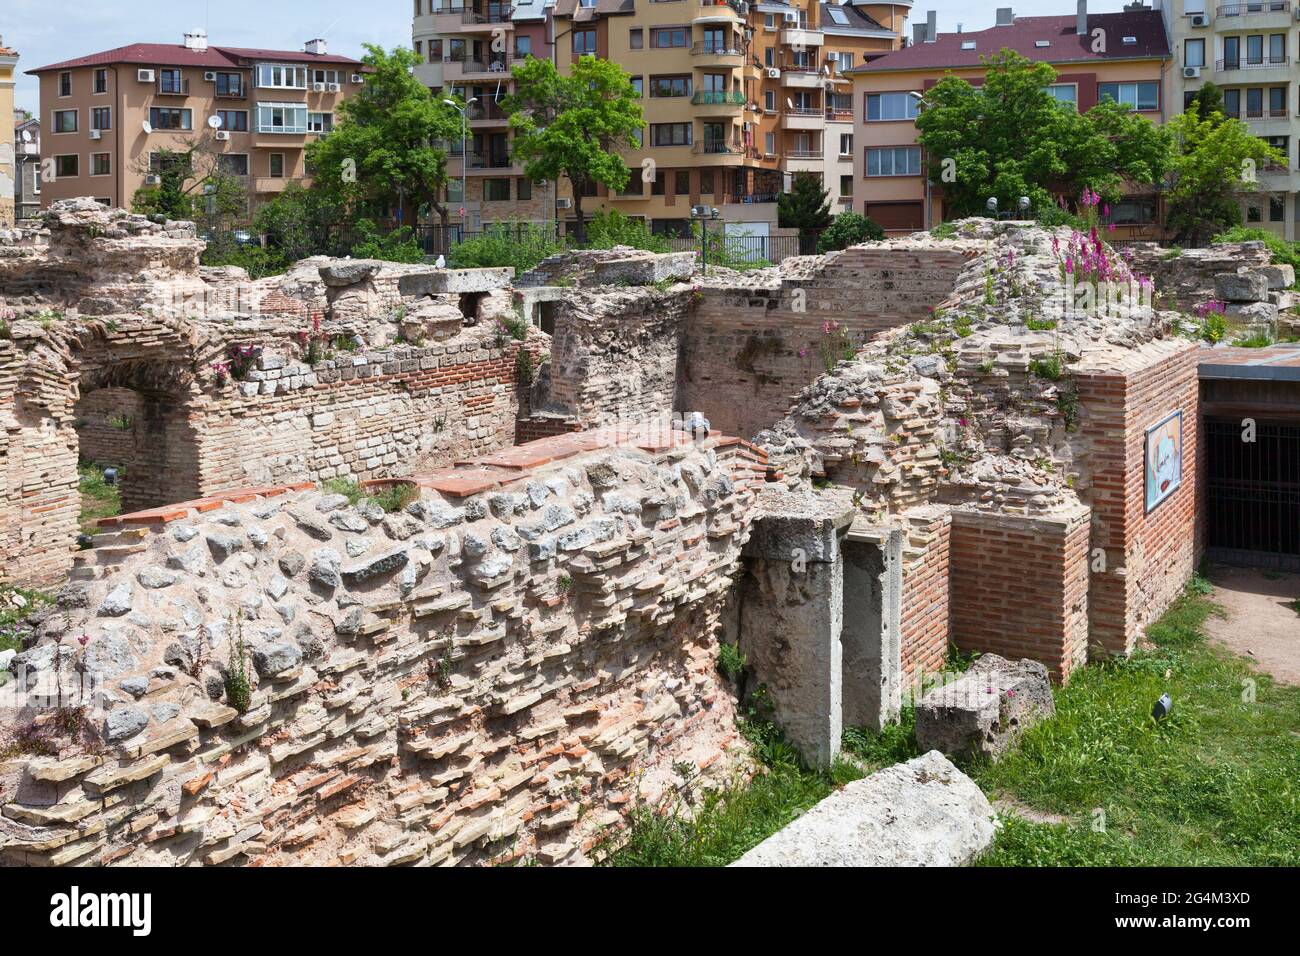 The Roman Baths of Varna in Bulgaria is an archeological site featuring an ancient Roman thermal bathhouse built in the late 2nd century CE. Stock Photo